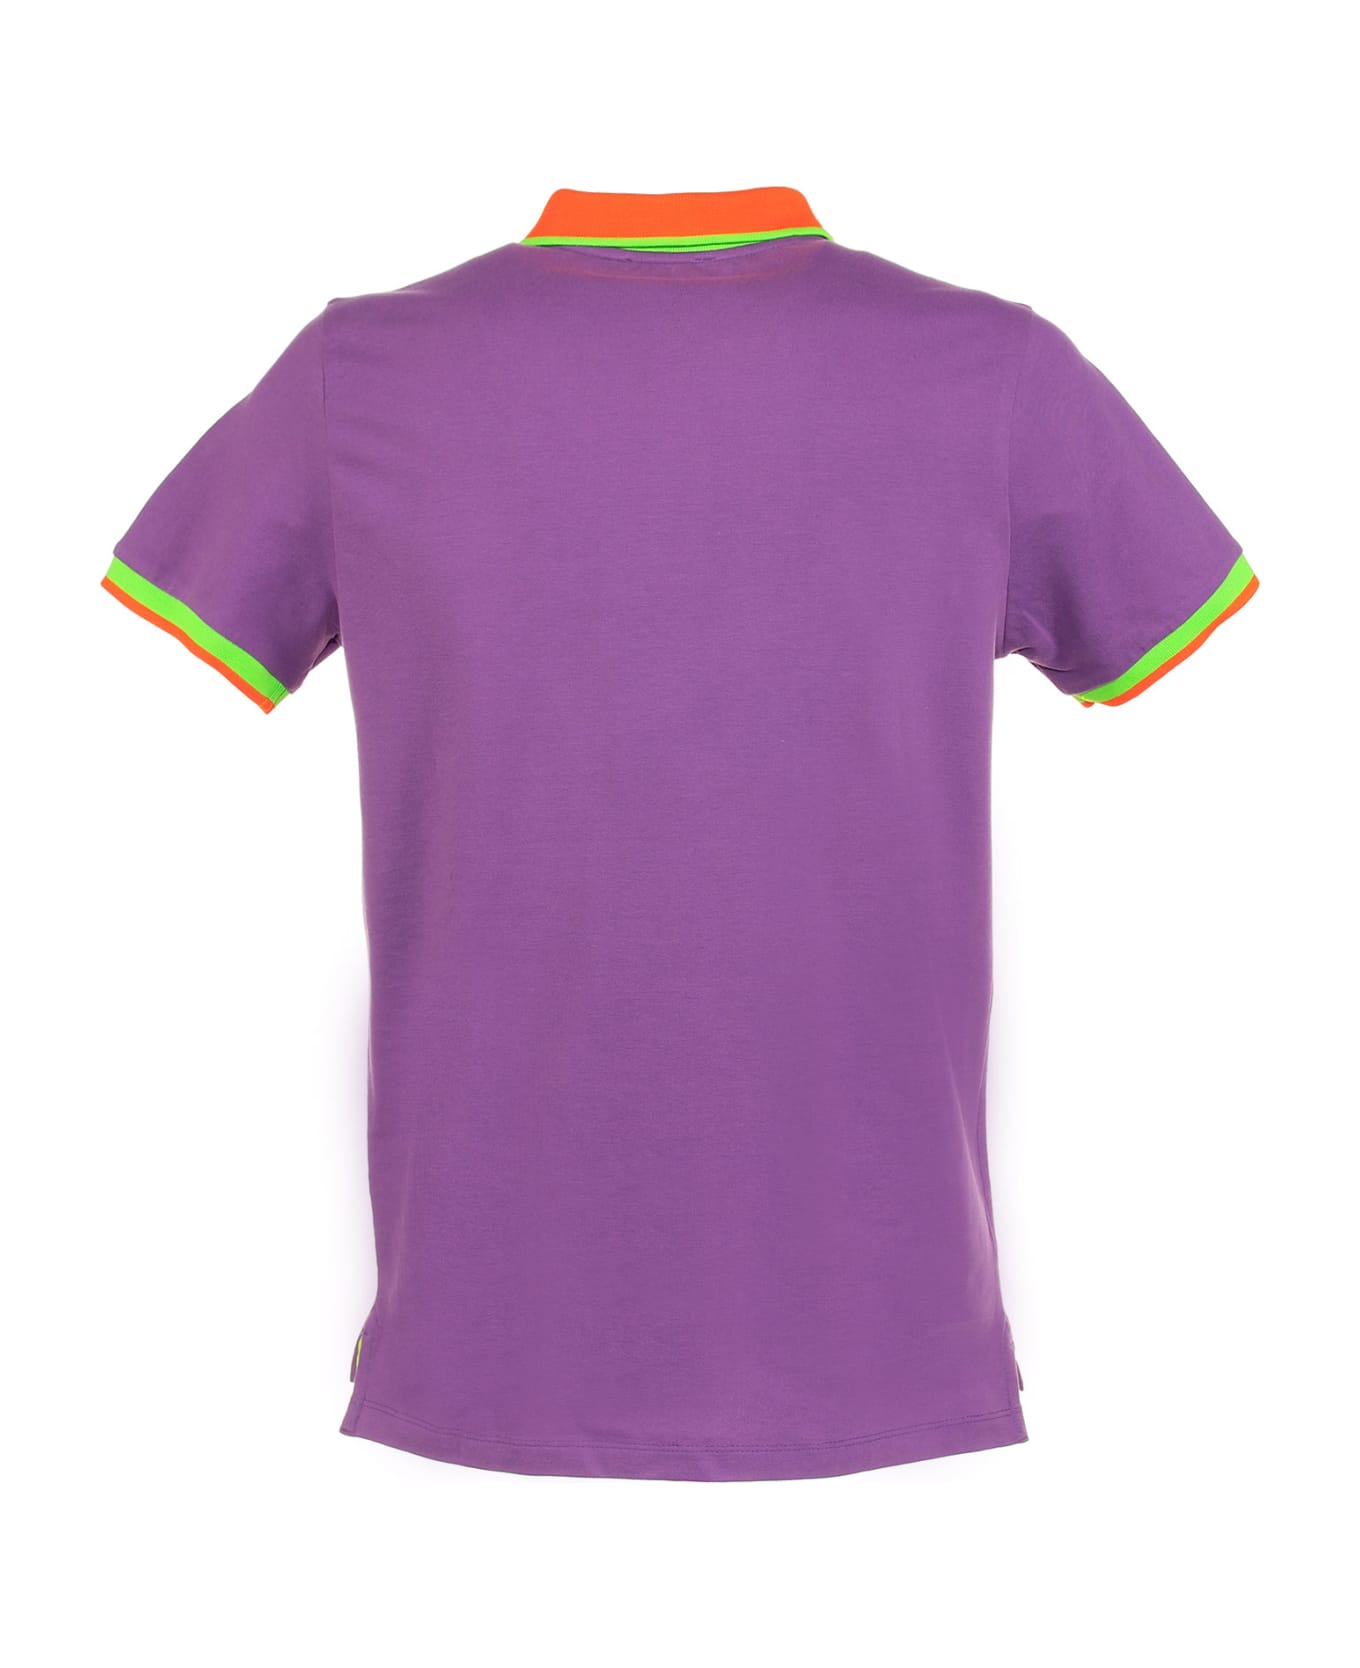 Peuterey Polo Shirt With Contrasting Details - VIOLA